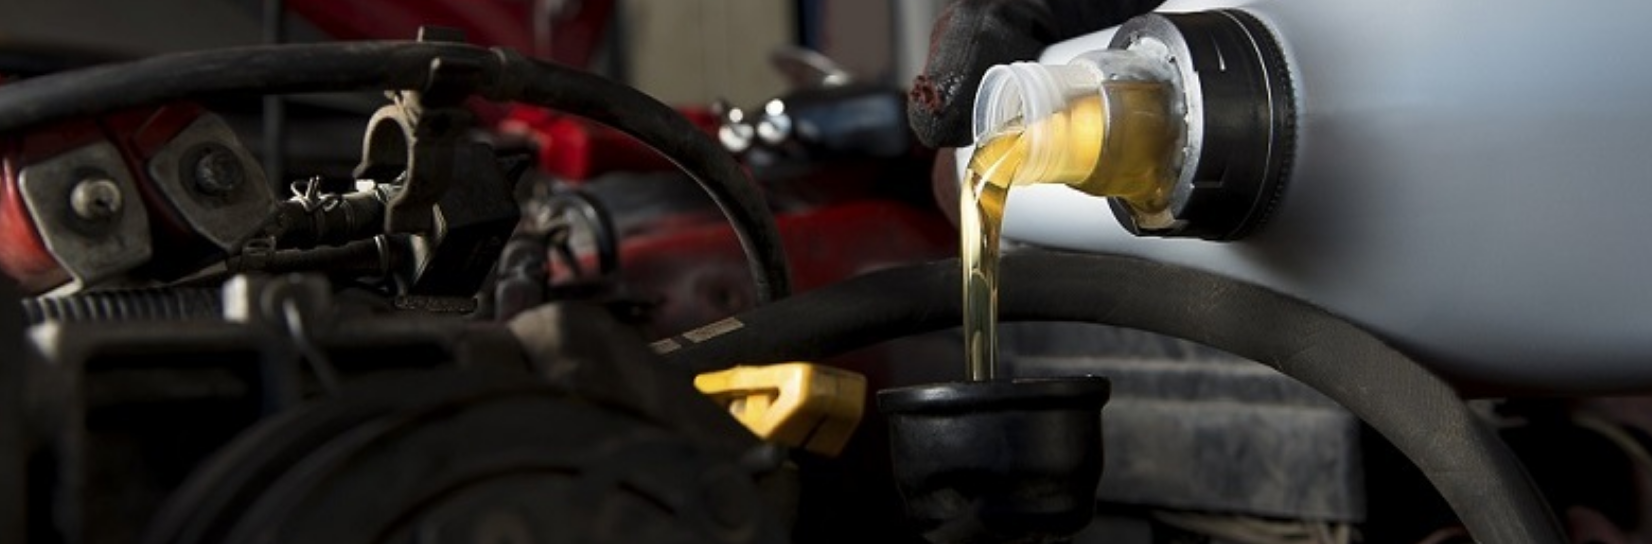 Oil Change Service in Pittsburgh, PA